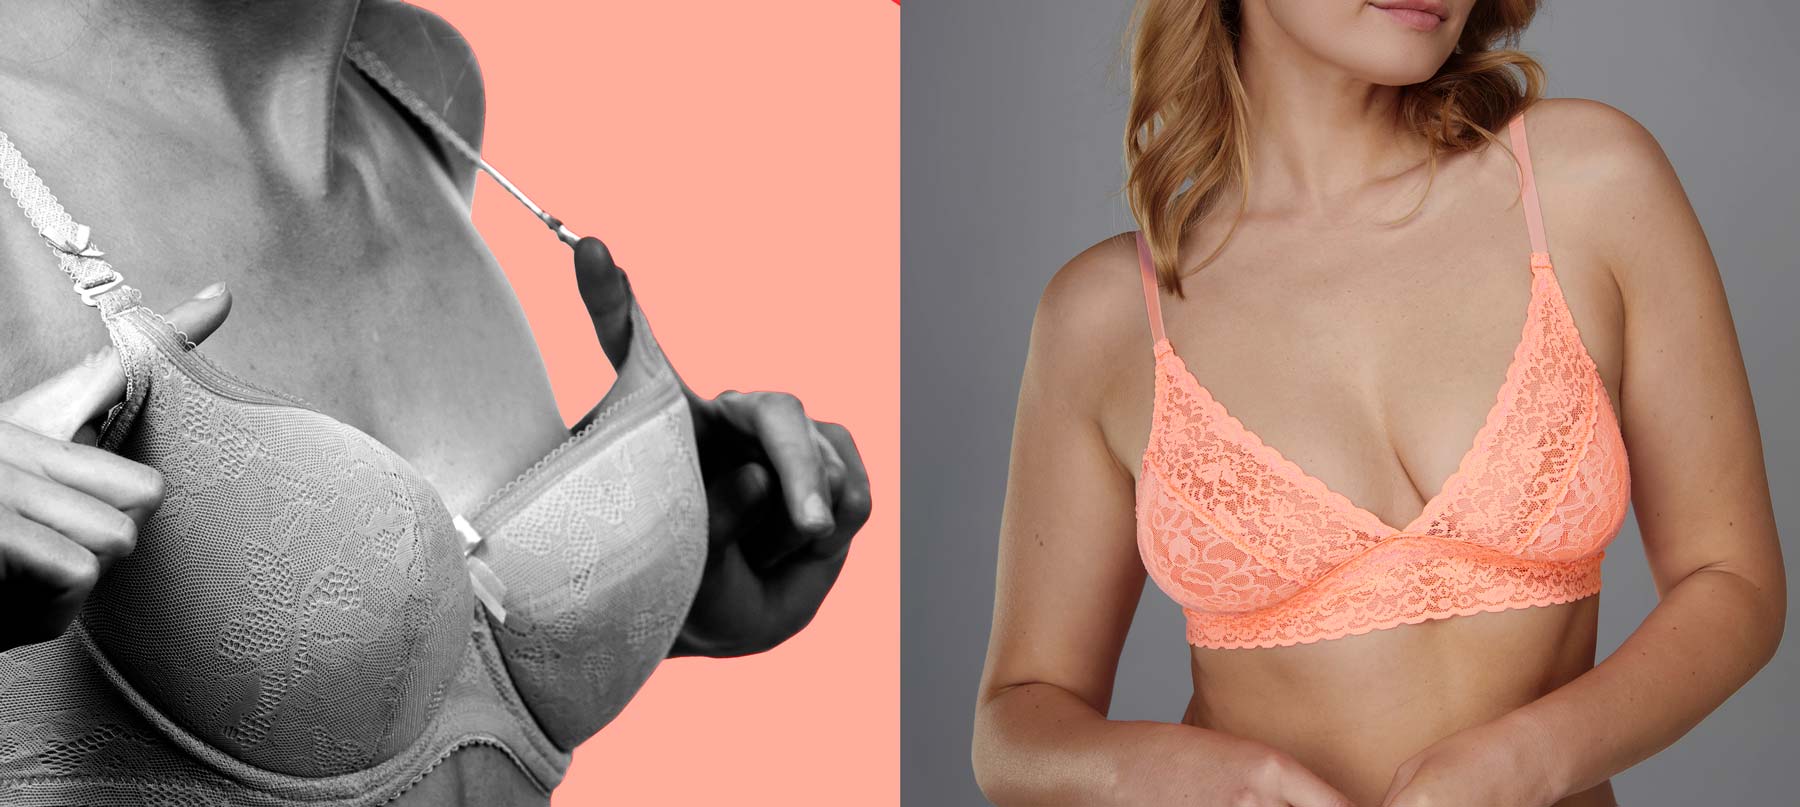 When is the Right Time to Replace Your Bra? - LoveNotes LoveSuze Blog